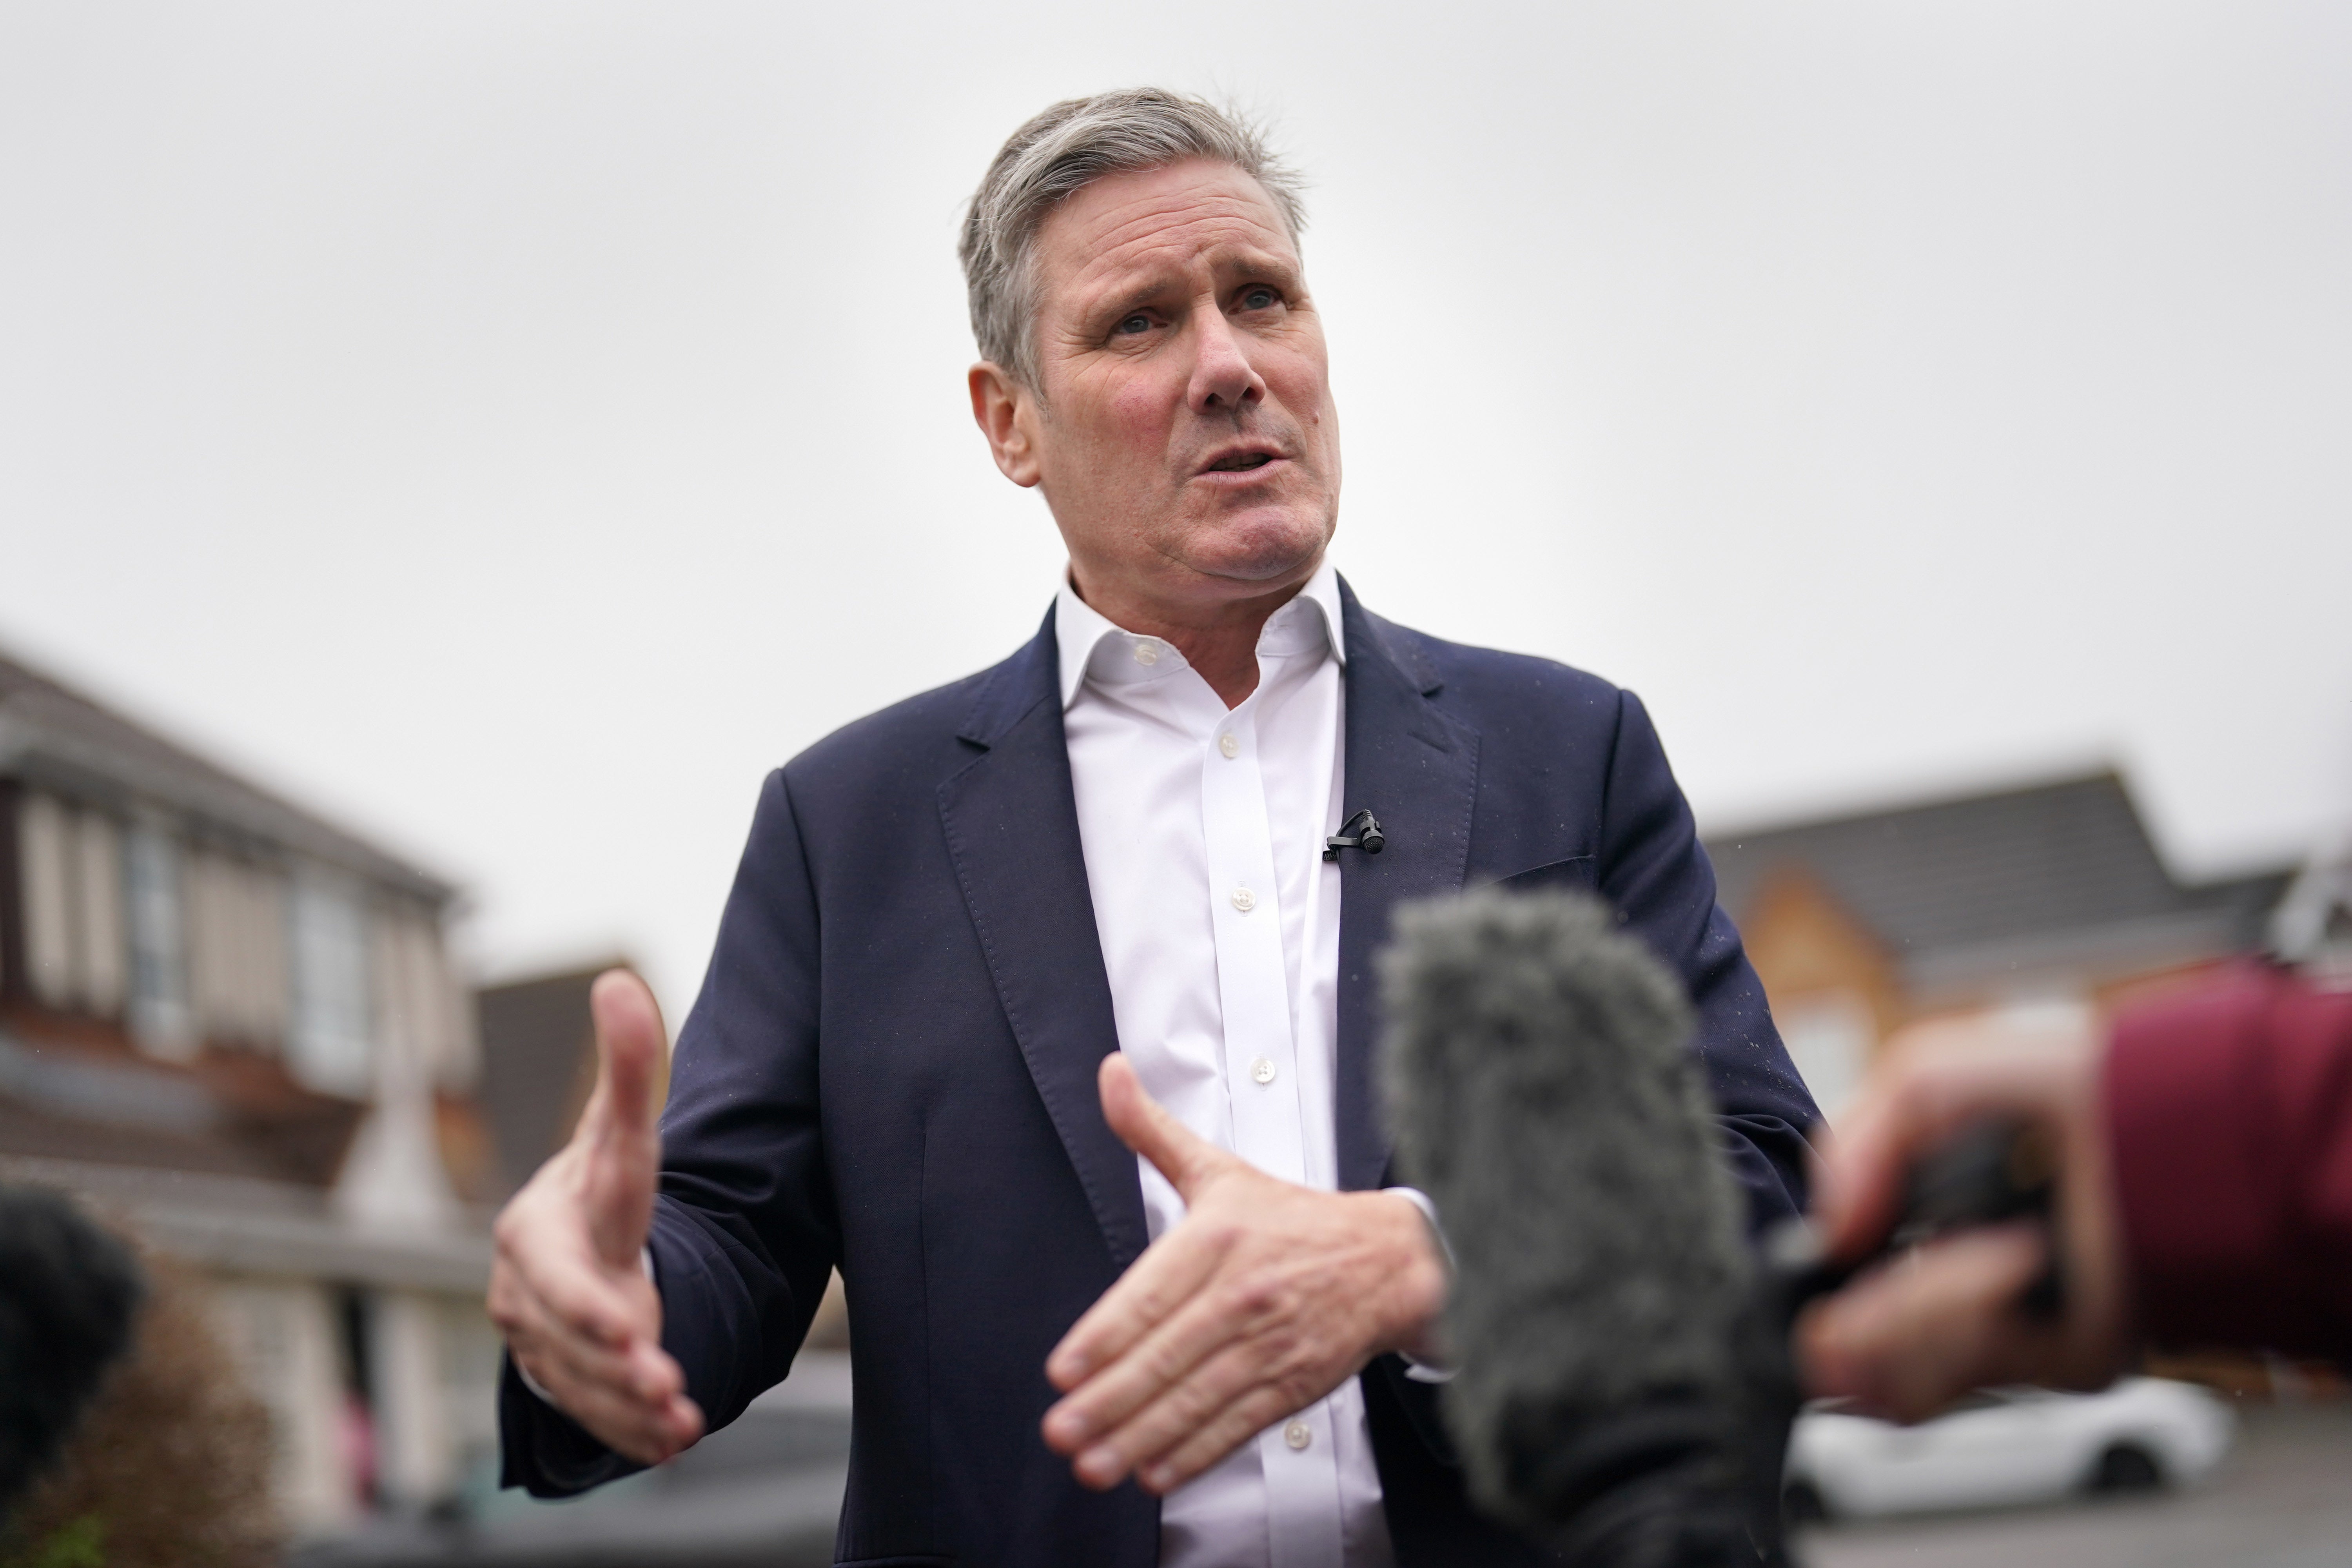 Kier Starmer’s Labour party currently leads in the opinion polls